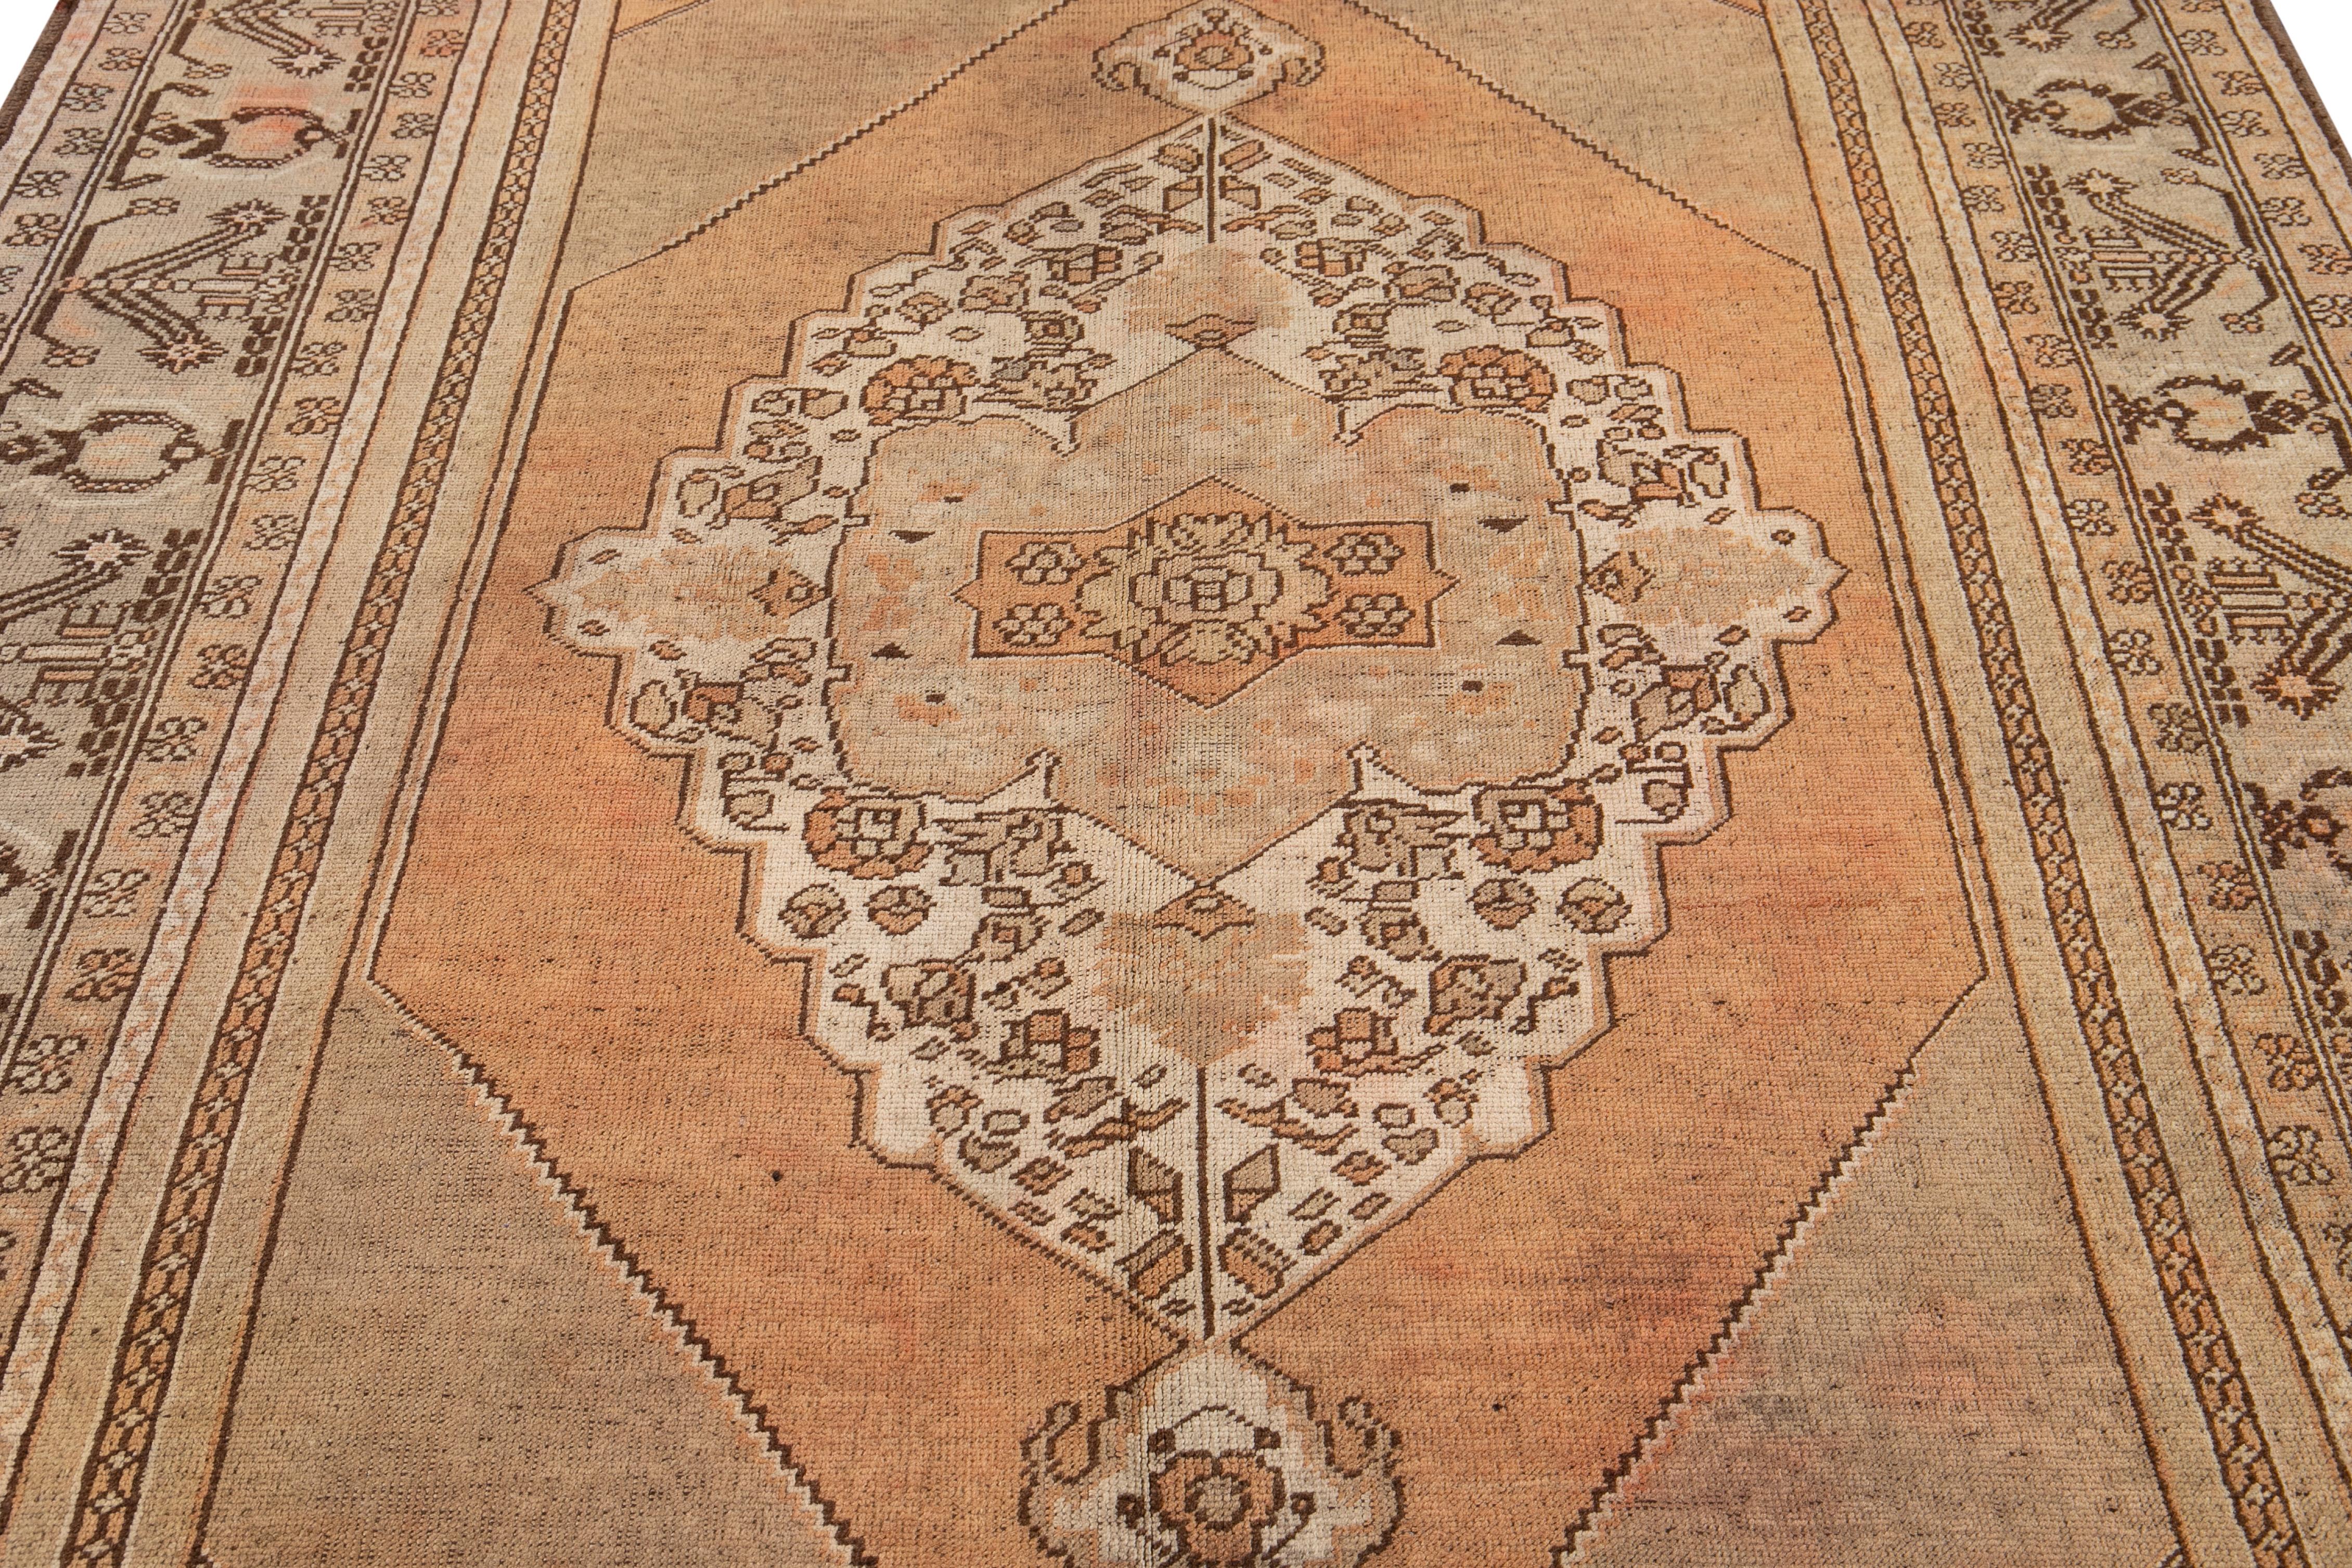 Beautiful Antique Khotan hand-knotted wool with a brown and orange rust color field. This piece has a designed frame and beige accents in a center medallion design.

This rug measures 6' 5